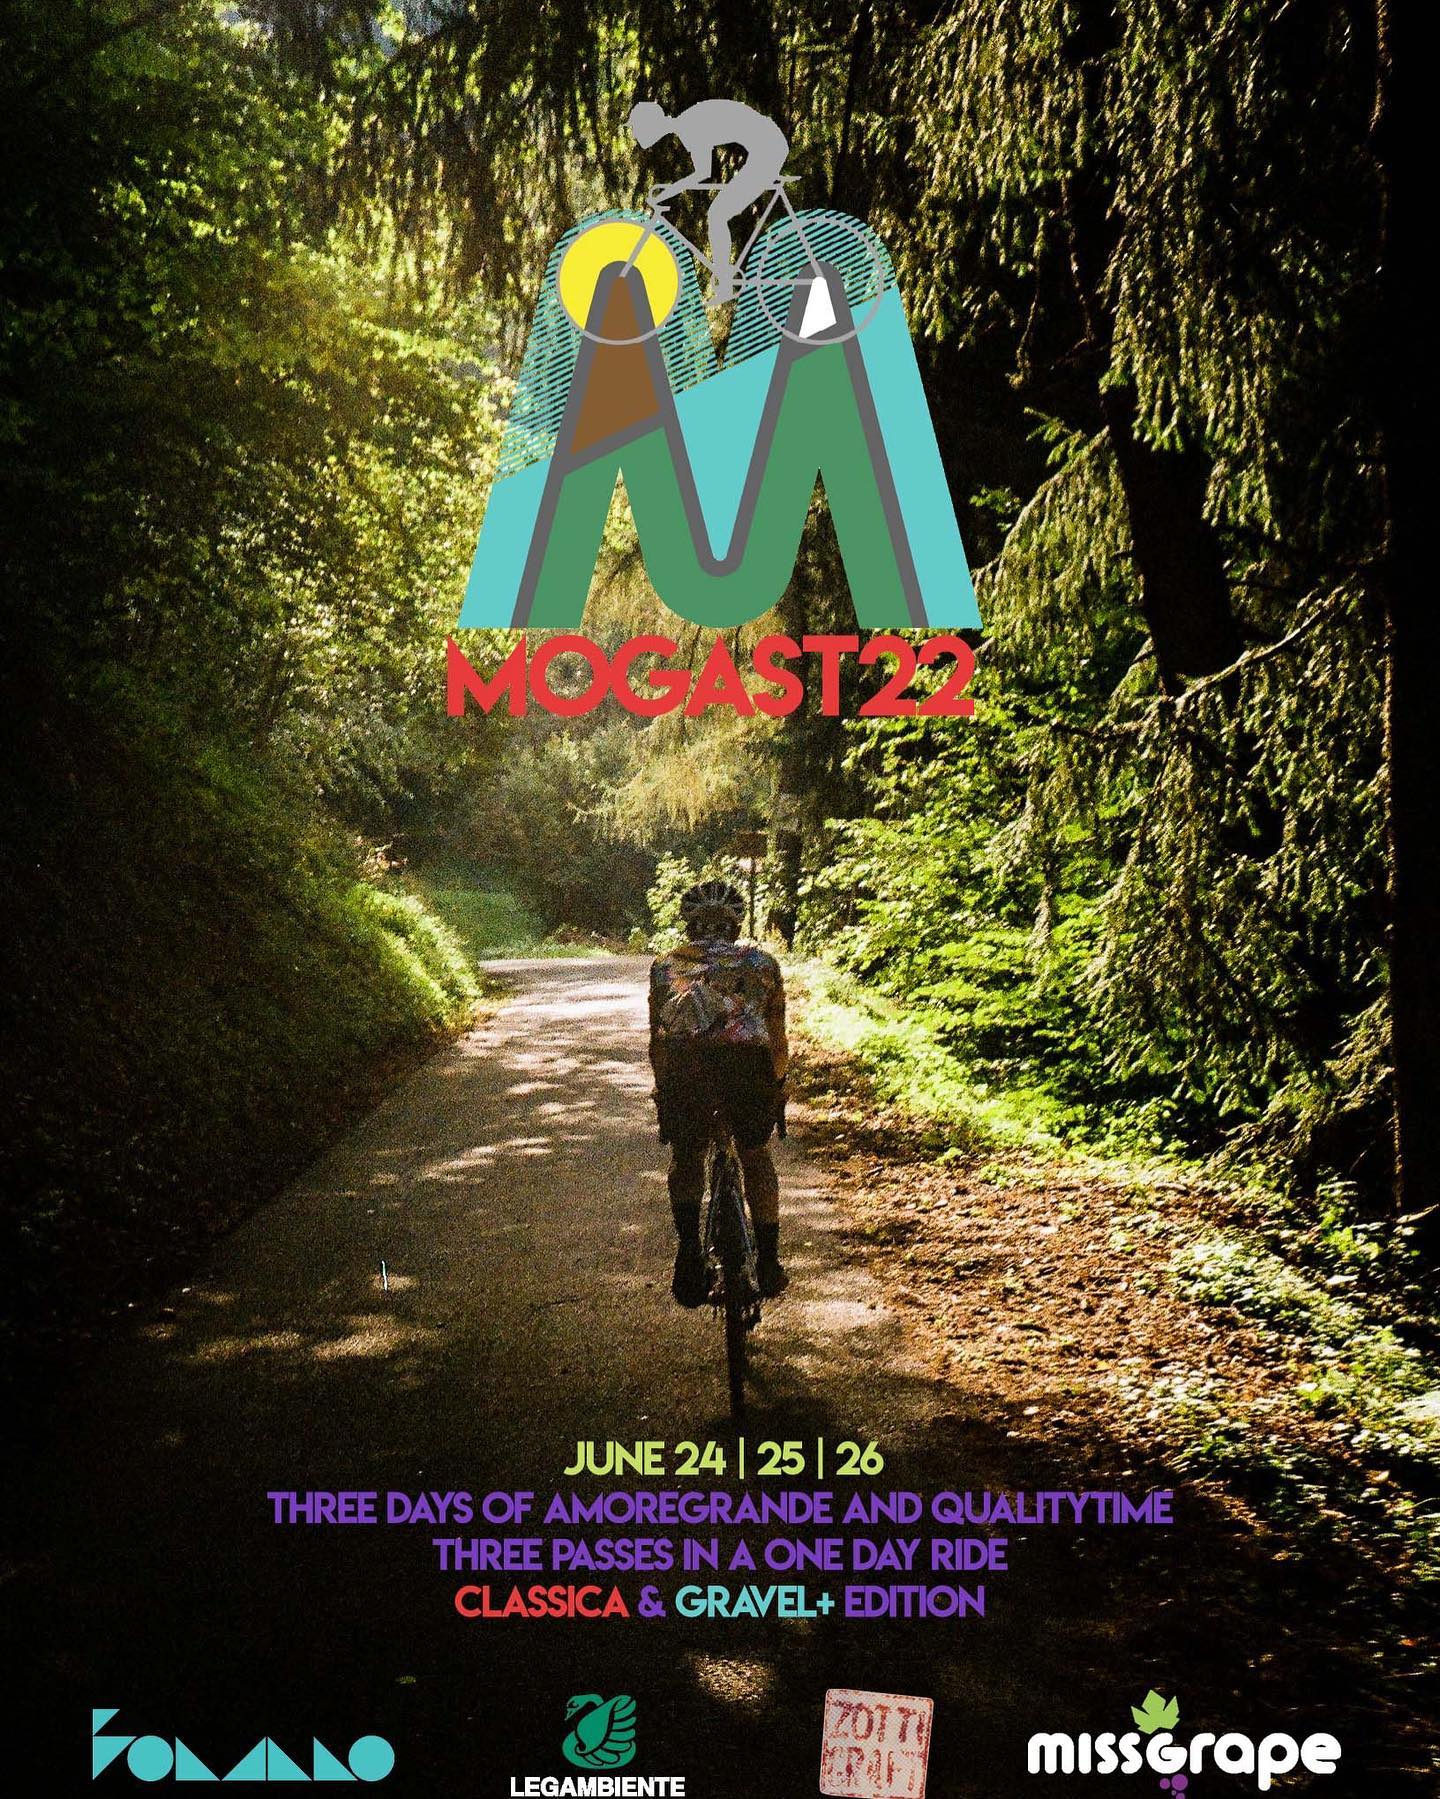 •
Time flies
-53 to #MOGAST22
Subscriptions closing soon | Only few places available to complete the cast 🎥
~~~~~~~~~~~~~~~~~~~~~~~~~~~~~~~~
#MOGAST22 will be possible also thanks to @miss_grape_official @ciclibonanno @legambientelombardia 
@zotti.artworks 
~~~~~~~~~~~~~~~~~~~~~~~~~~~~~~~~
#MOGAST
#MOGAST22
#amoregrande™️
#qualitytime™️
#threepassesonedayride
#mortirolo
#gavia
#stelvio
#gravelplusediton
#ciclibonanno 
#zottiniforever
#missgrape
#casanaturasernio
#presidentessaedition
#cigarettesmaníandflattyres
@marziomarzorati 
@stefanozotti 

Pic by the master @bengtstillerphotography 
Our beloved Model
@sonnenalleecat